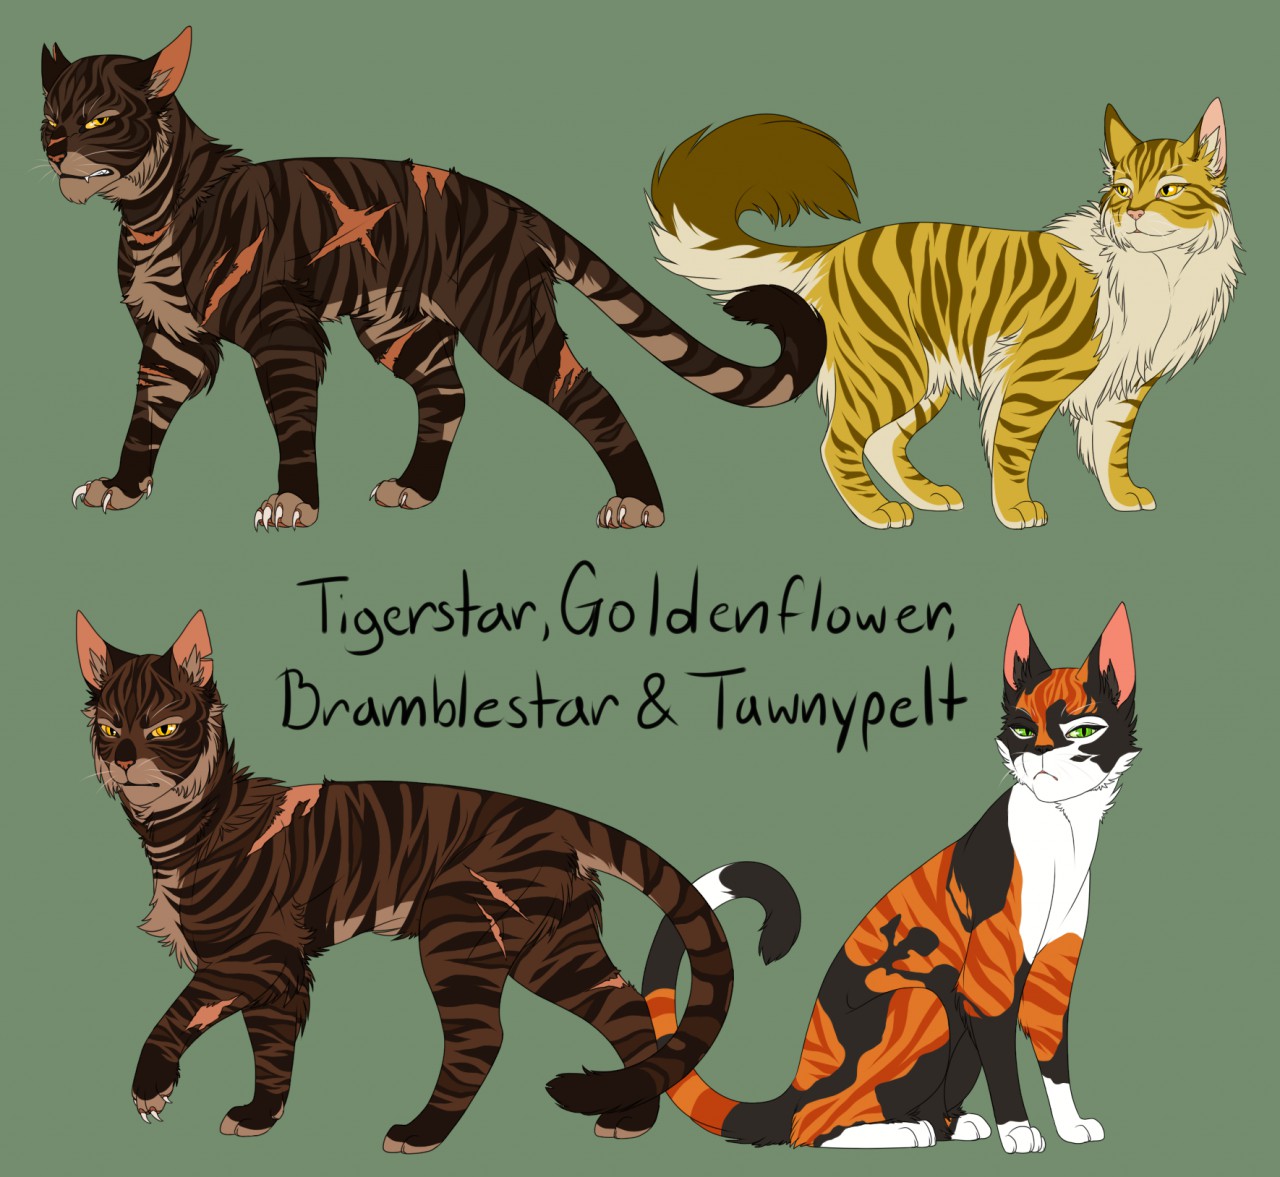 Warrior Cats - Tigerstar is honestly one of the best